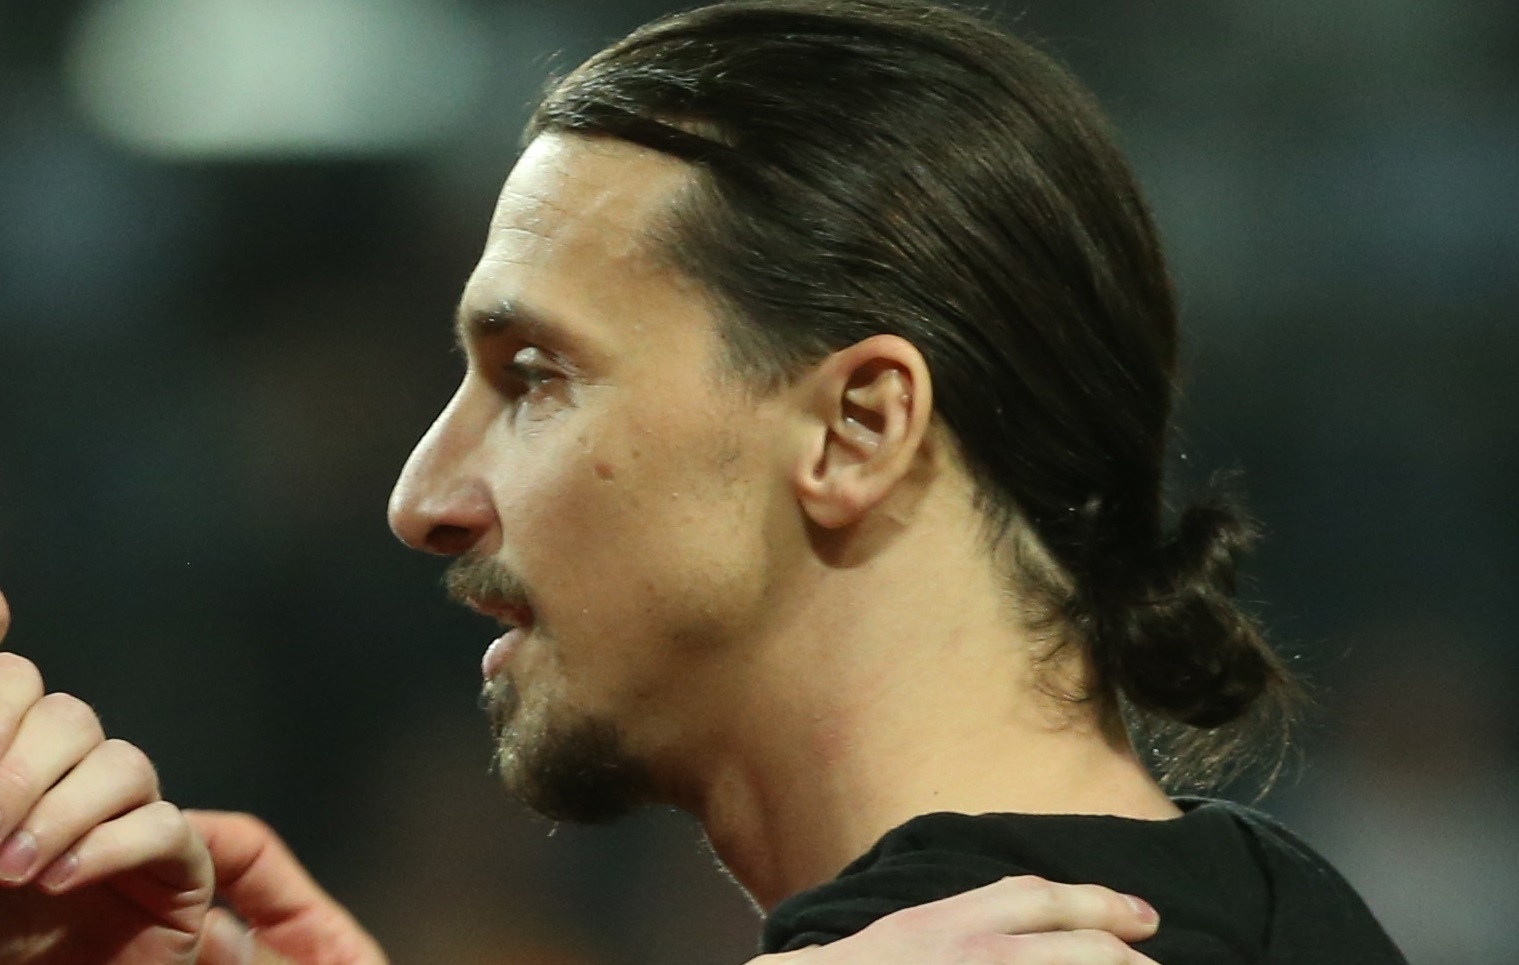 When I come back, the world will know' says Manchester United striker Zlatan...